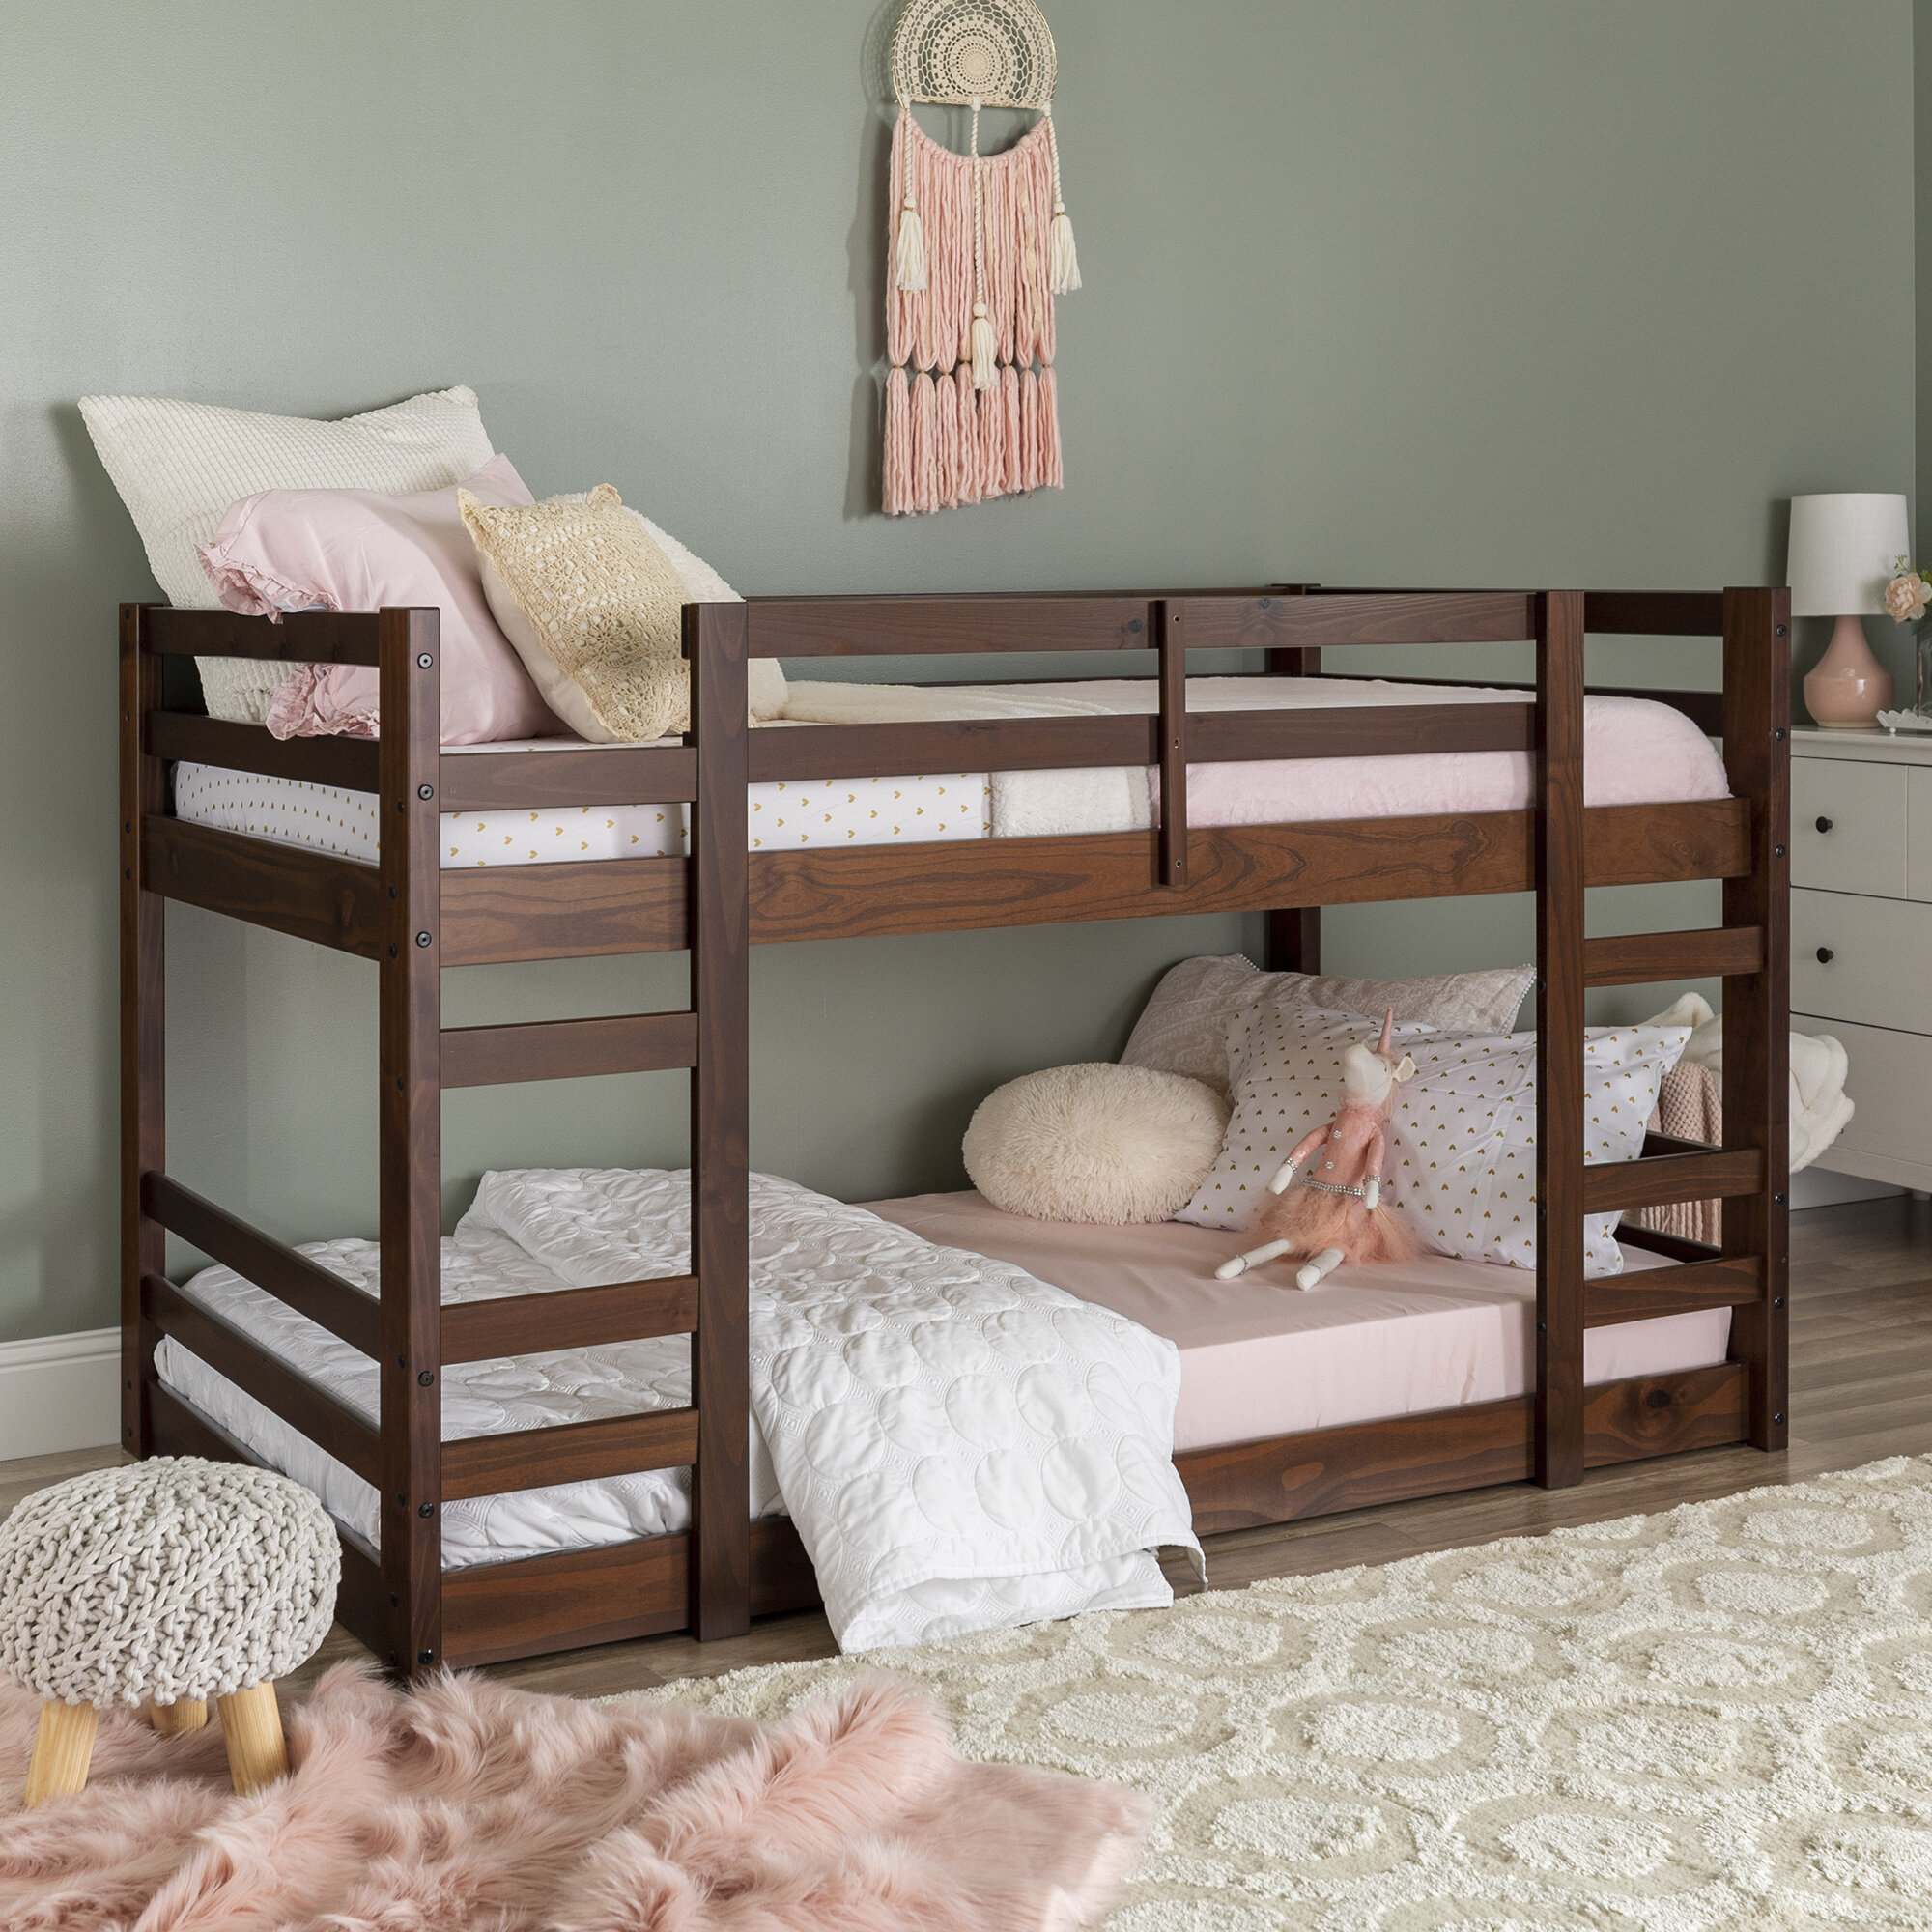 the bay bunk beds